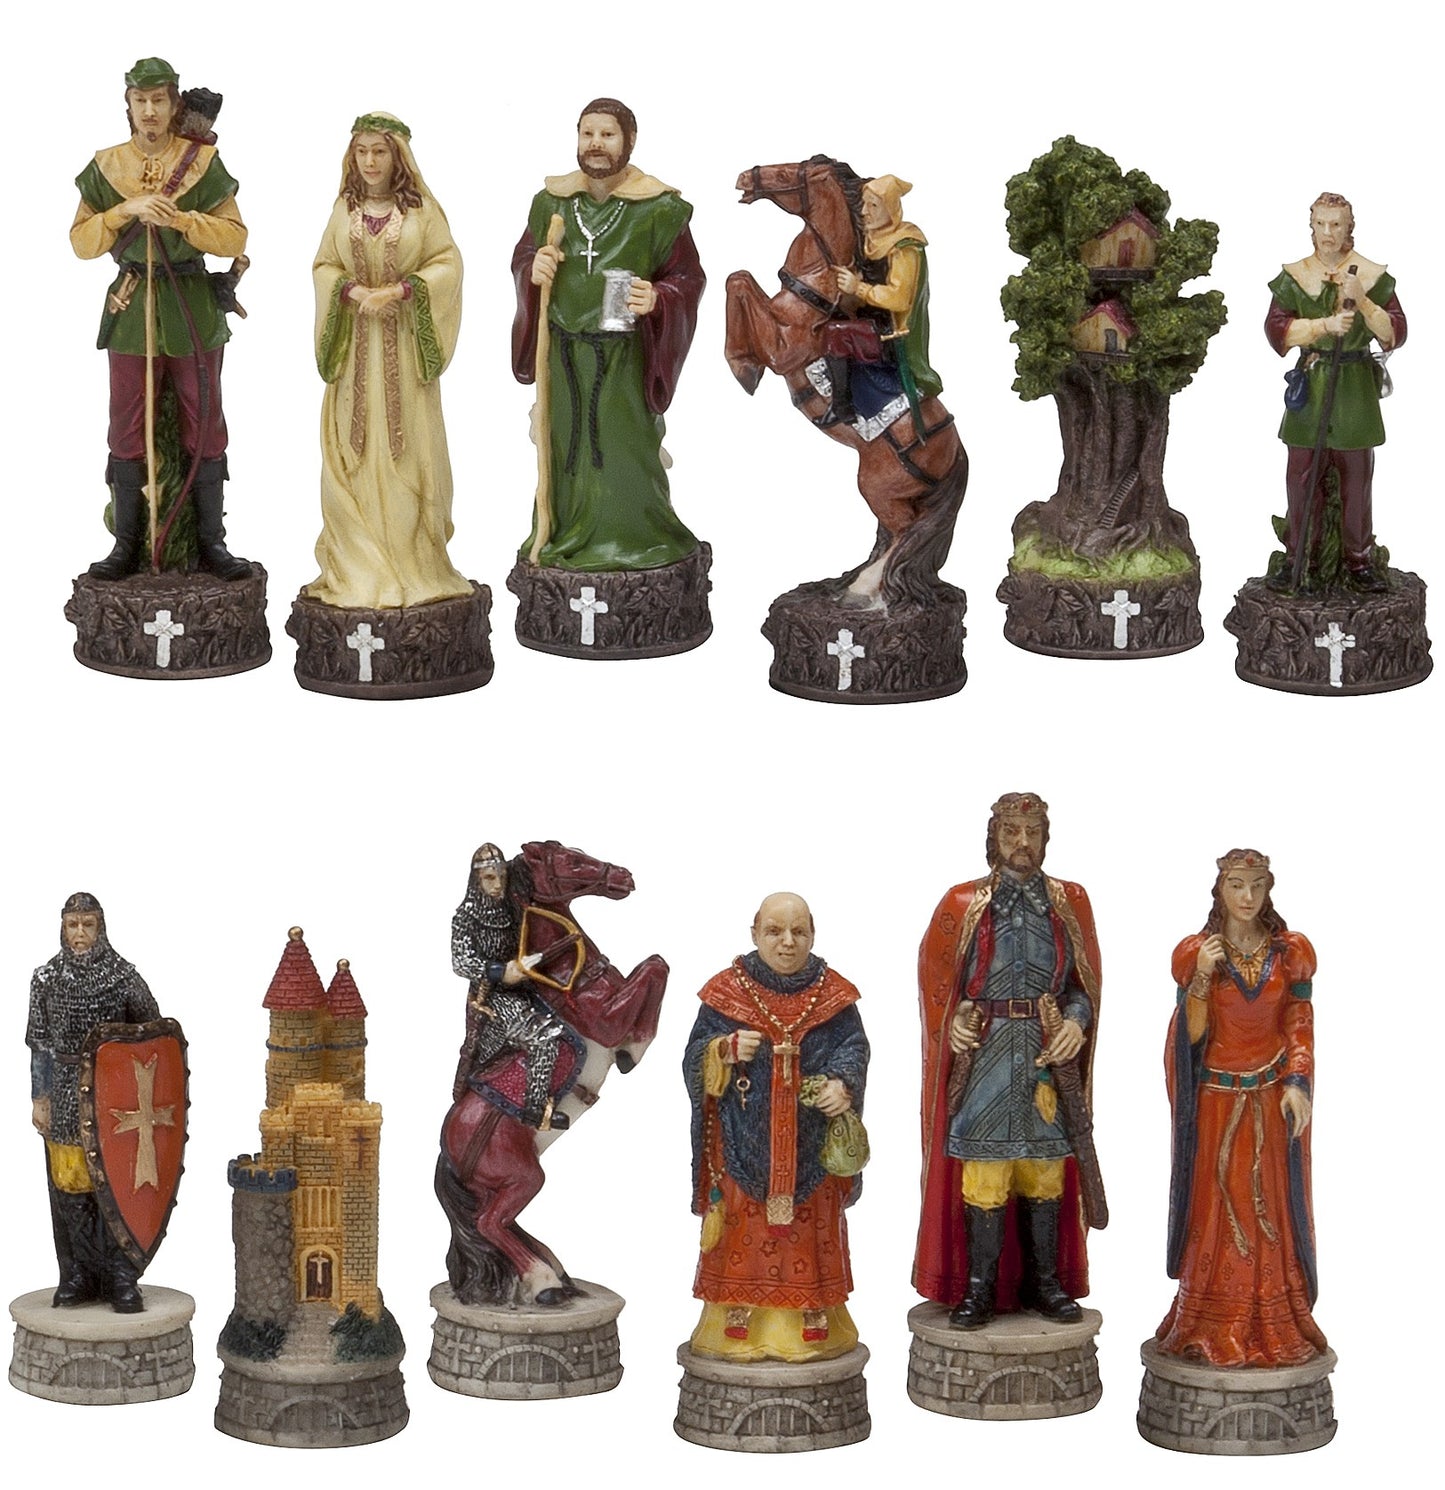 Robin Hood Themed Chess Pieces